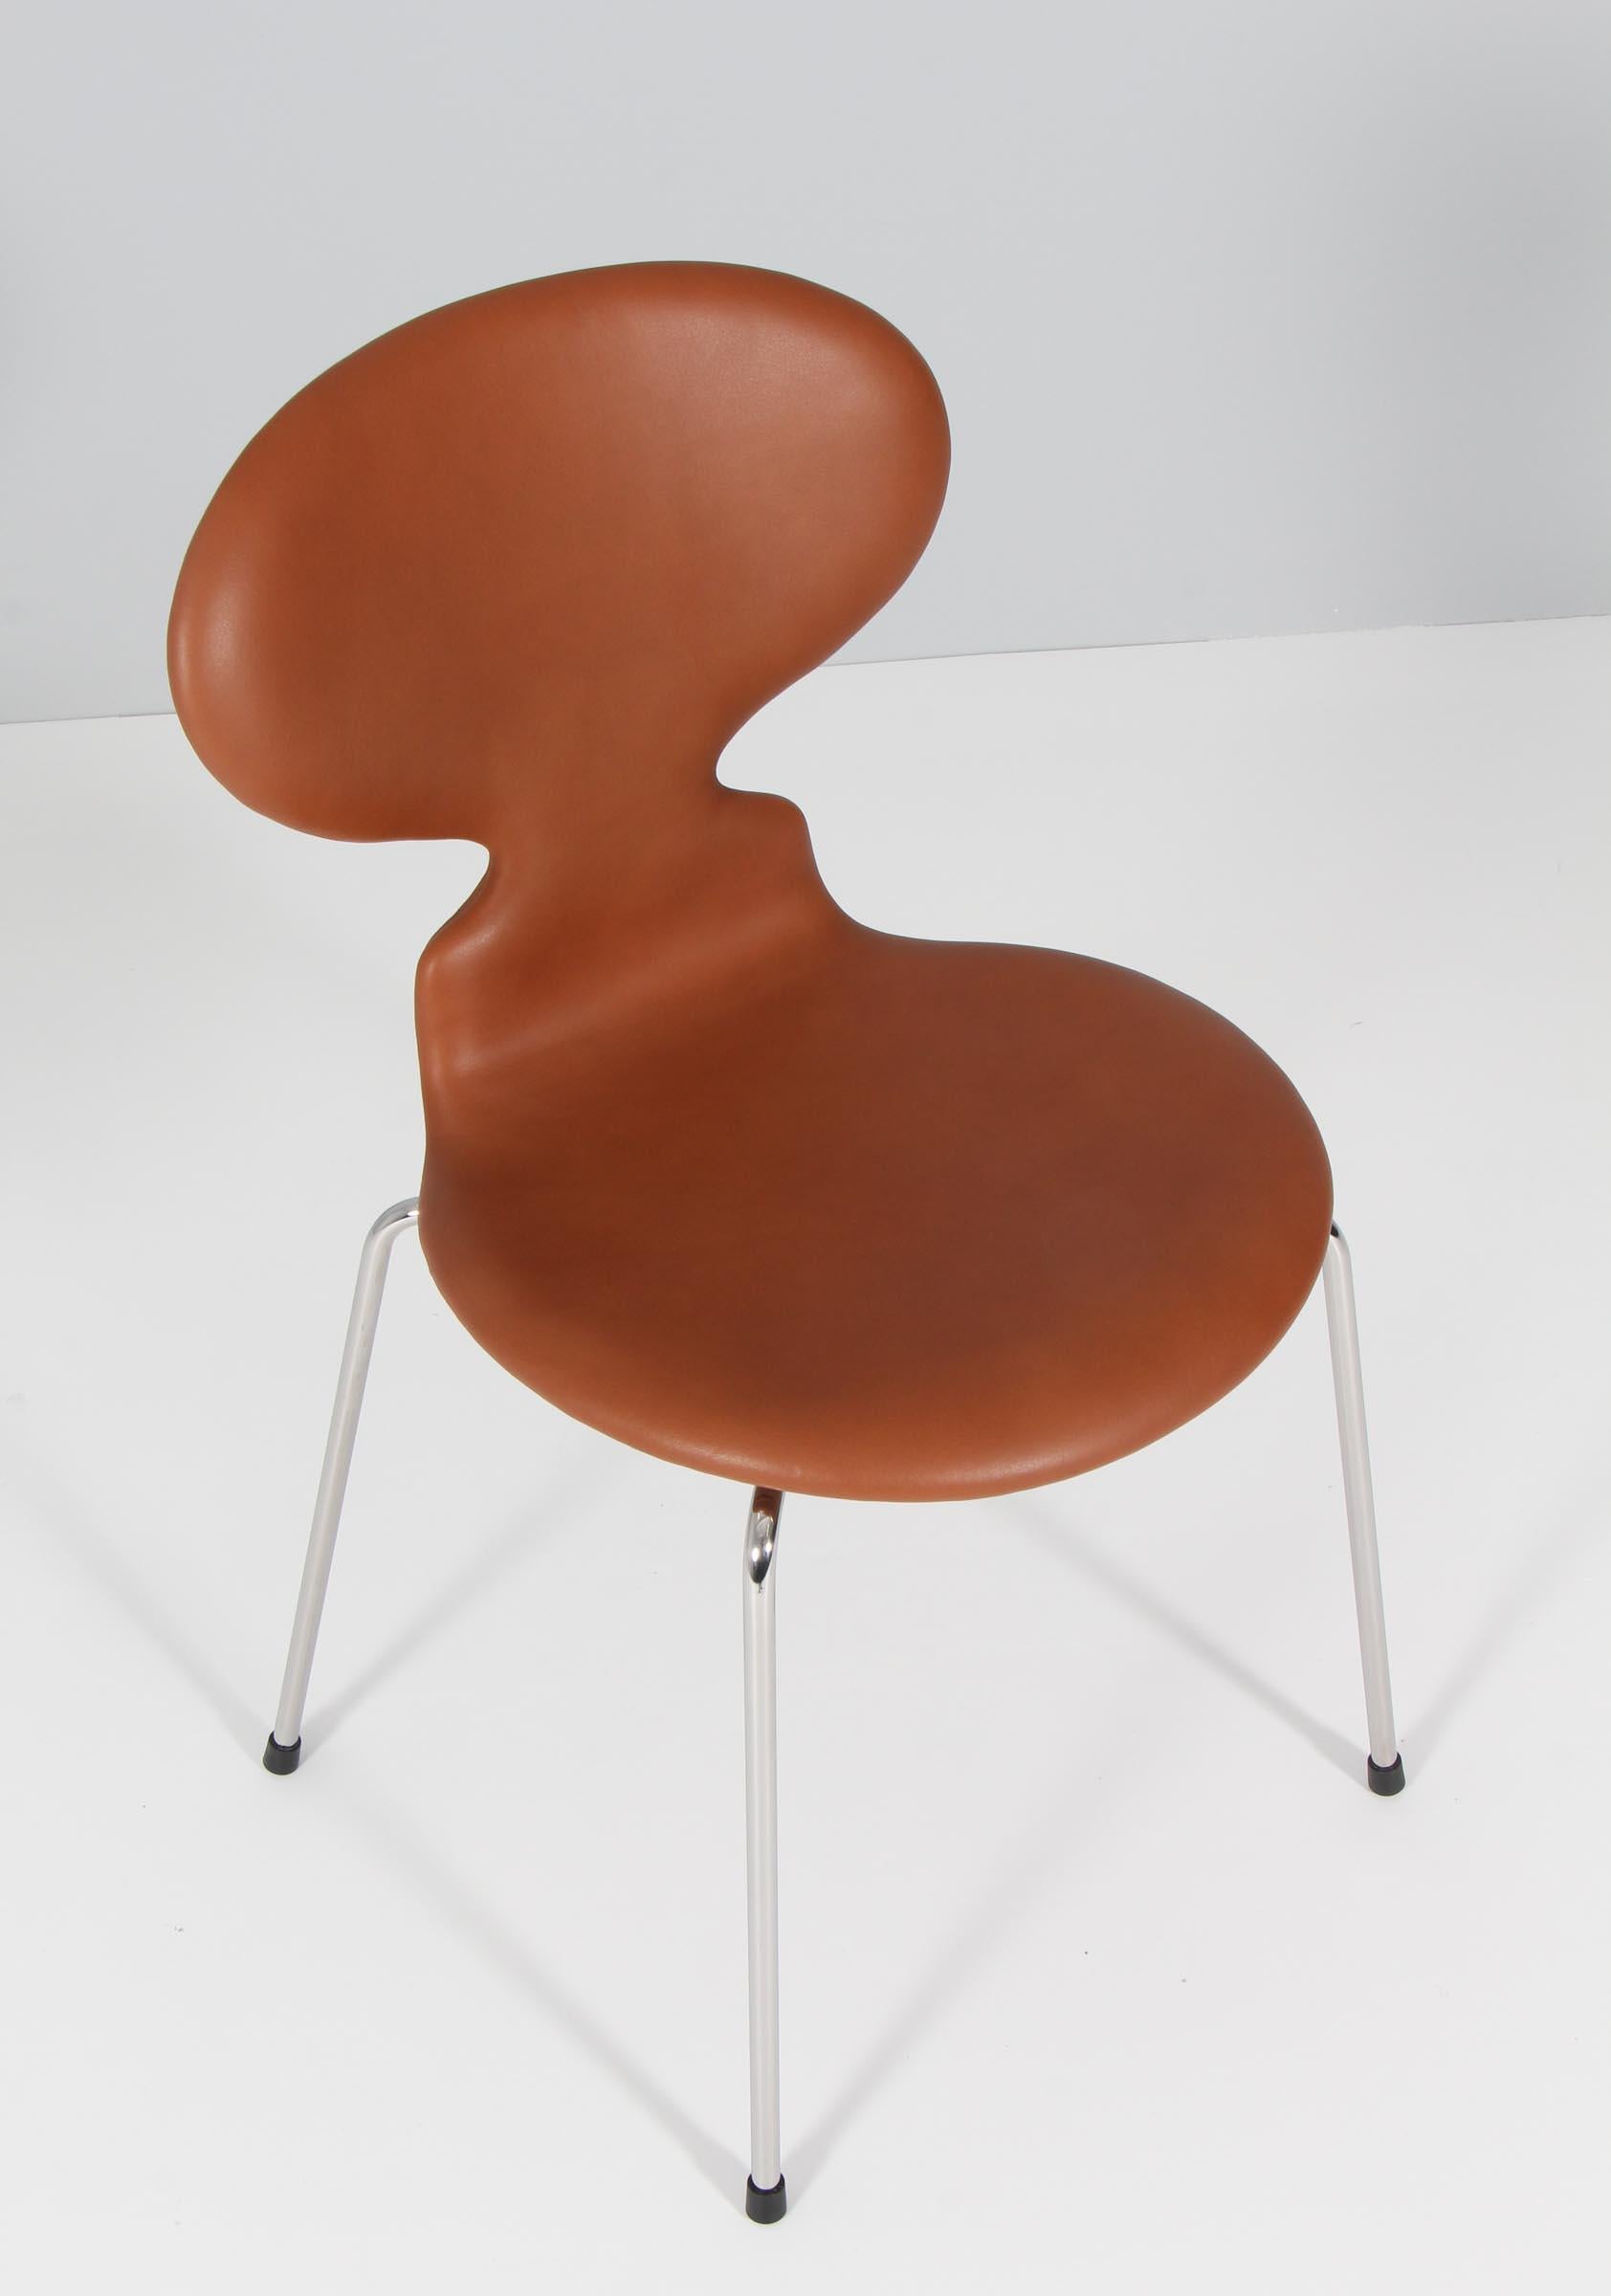 Arne Jacobsen dining chairs, new upholstered with cognac aniline leather. 

Chromed base. 

Model 3101 